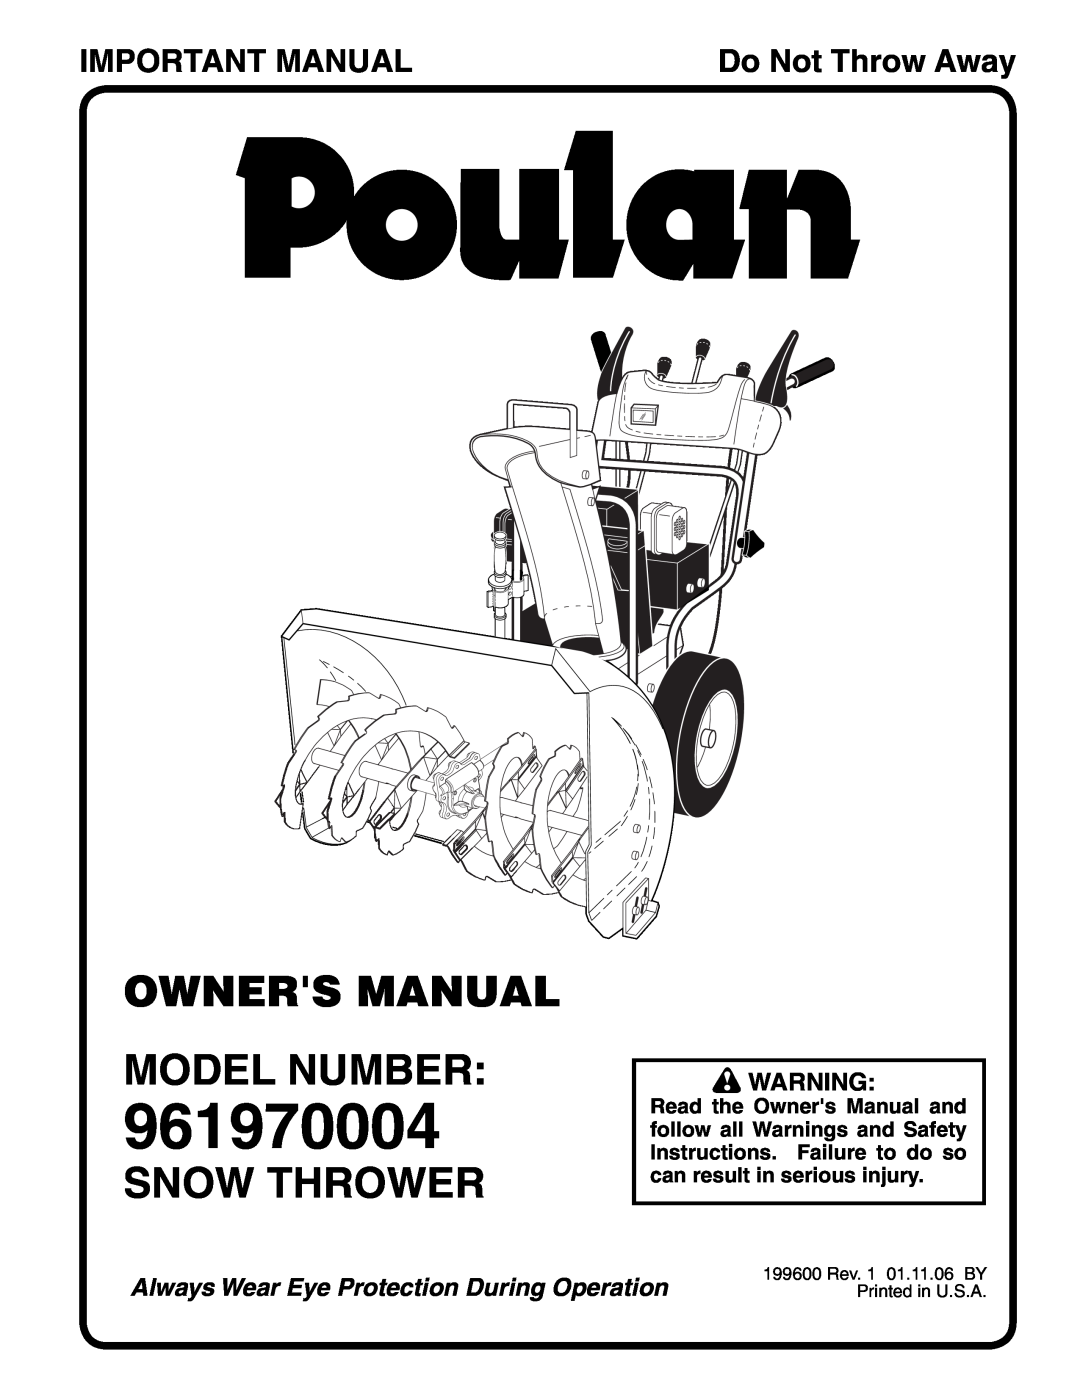 Poulan 199600 owner manual Owners Manual Model Number, Snow Thrower, Important Manual, 961970004, Do Not Throw Away 